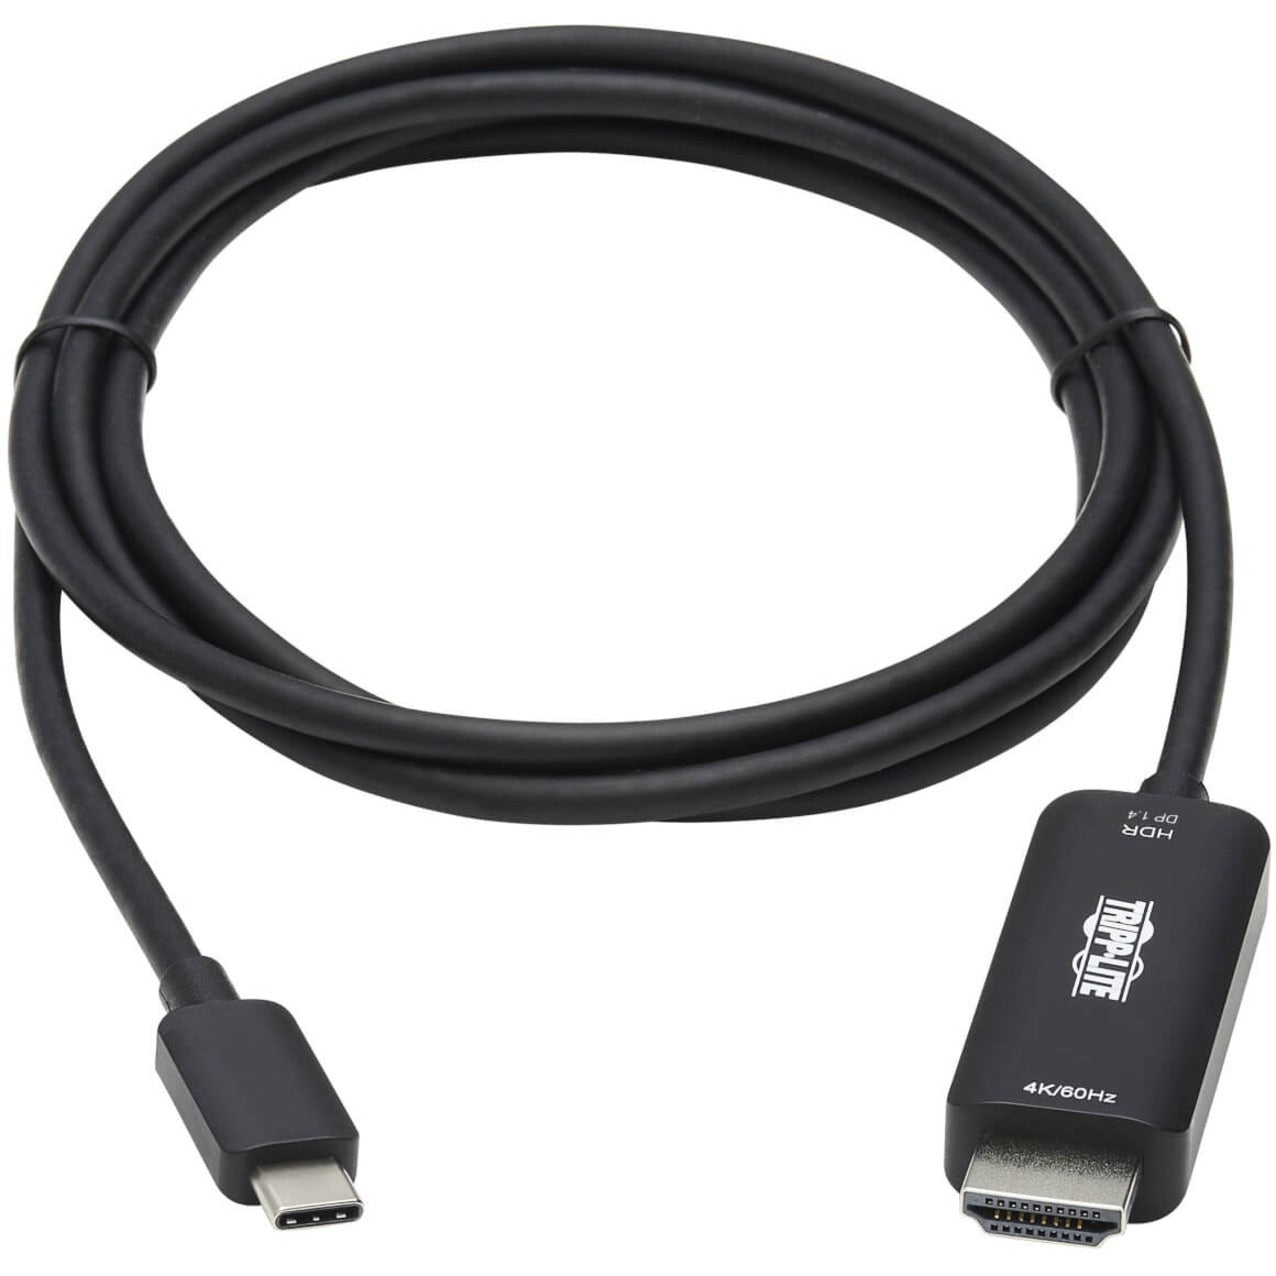 Tripp Lite by Eaton U444-003-HDR4BE USB-C to HDMI Adapter Cable, Black, 3 ft.